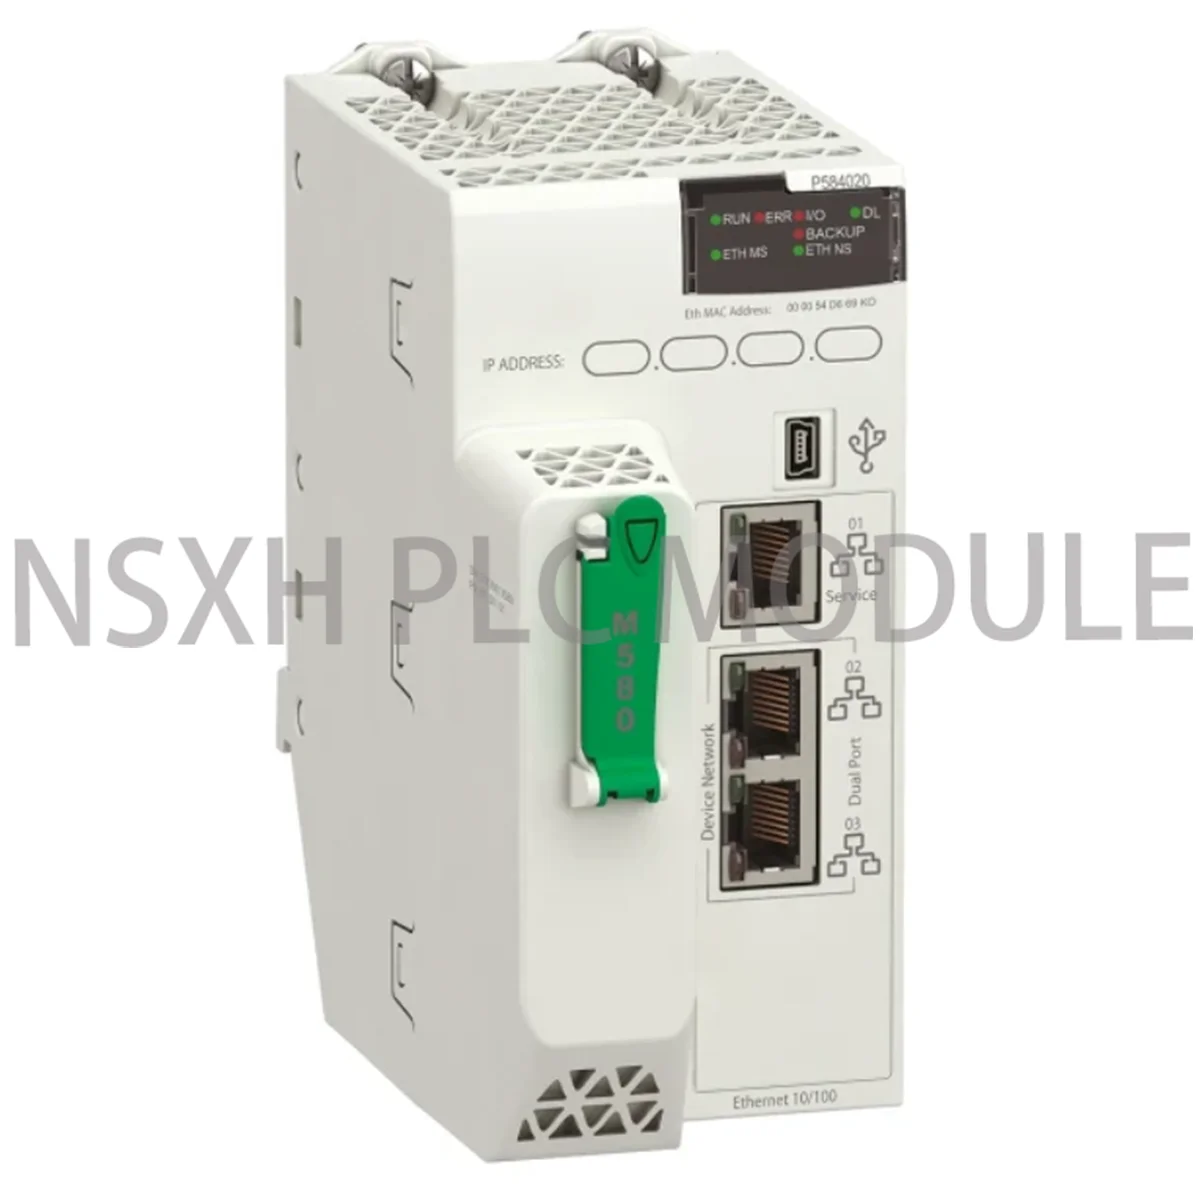 

New Original BMEP584020 The Electric PLC CPU Modicon M580 series is used in the Modicon M580 Ethernet network